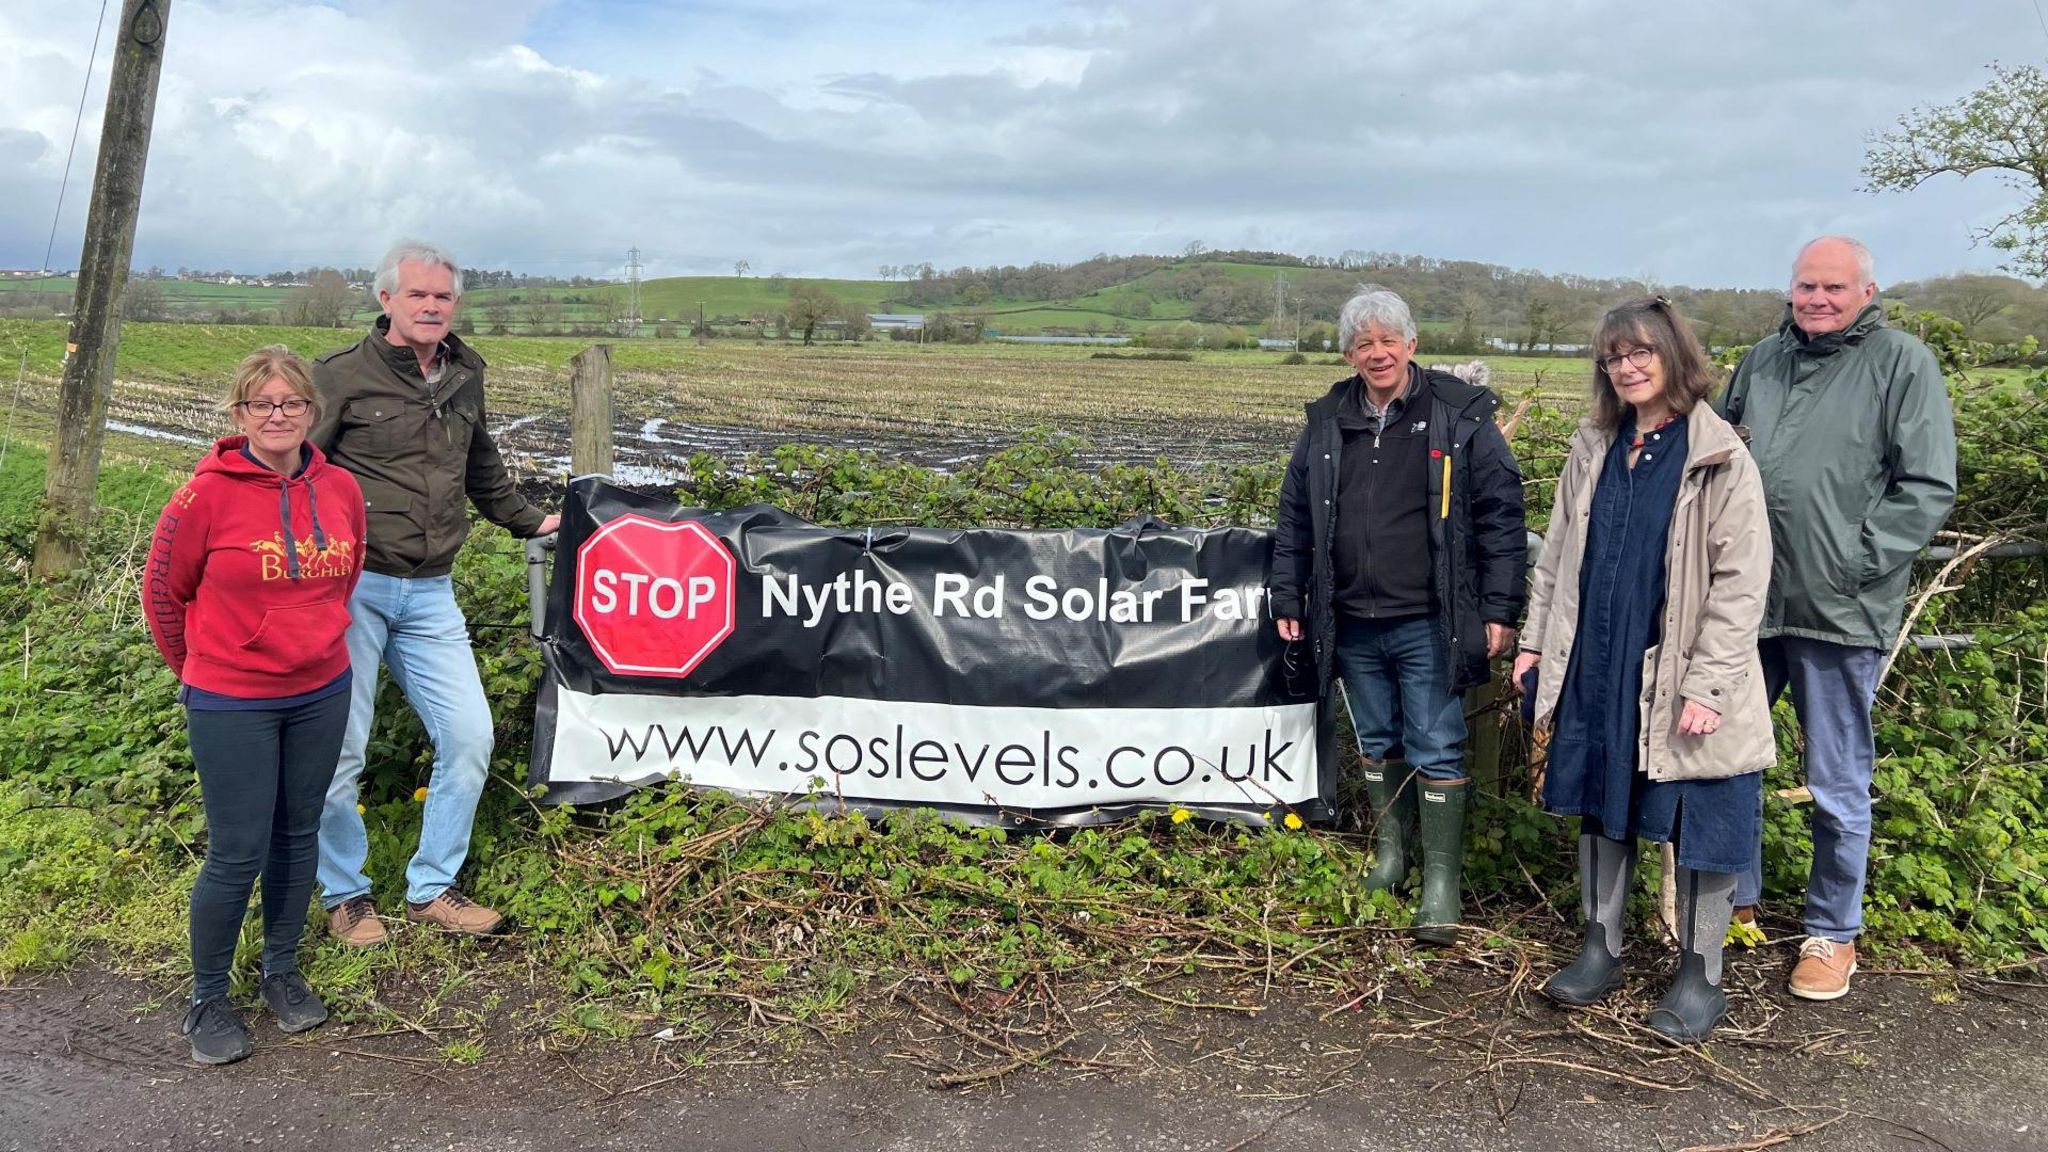 Campaigners on the proposed solar farm site